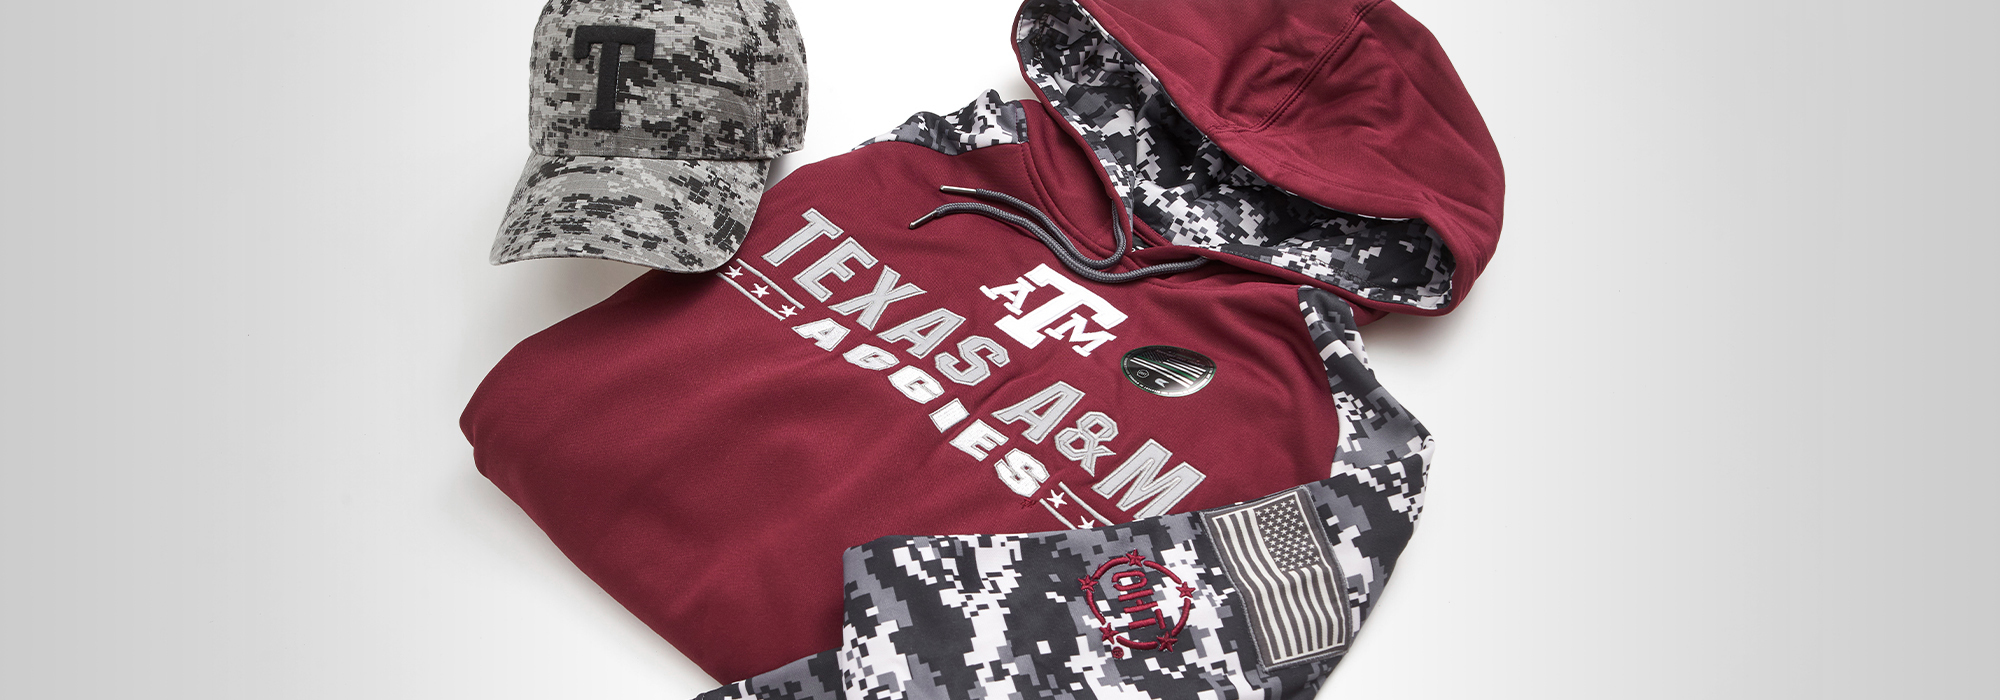 TAMU and Operation Hat Trick branded merchandise laid out on a white background. Items include a camo hat and maroon and camo sweatshirt. 